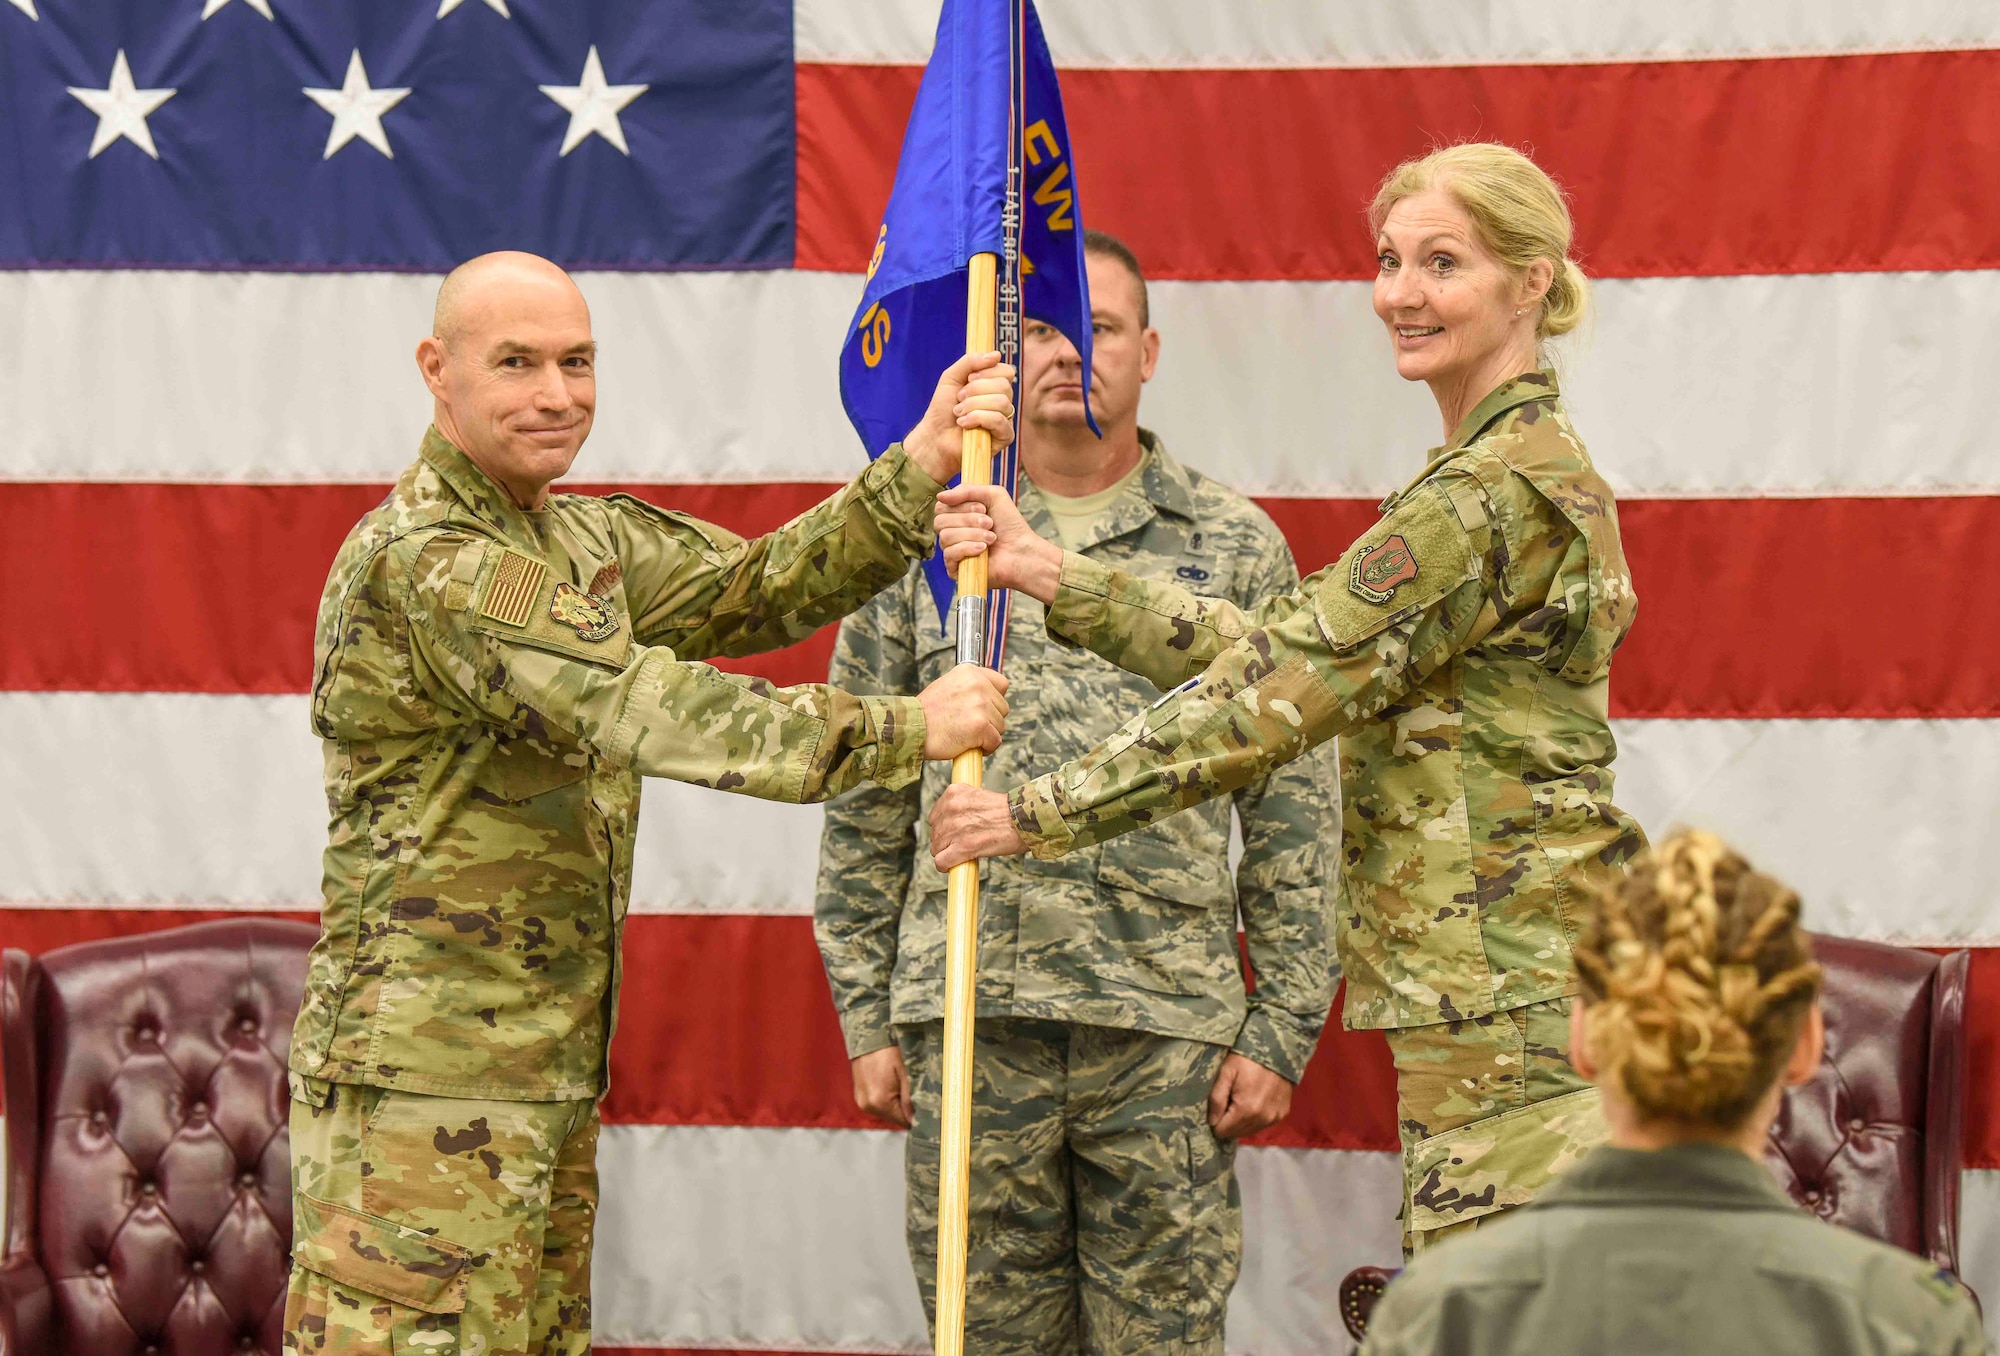 Col. Jim Greenwald, 944th Fighter Wing commander, presented command of the 944th MDS to Col. Jennifer Archer in front of fellow commanders and peers.